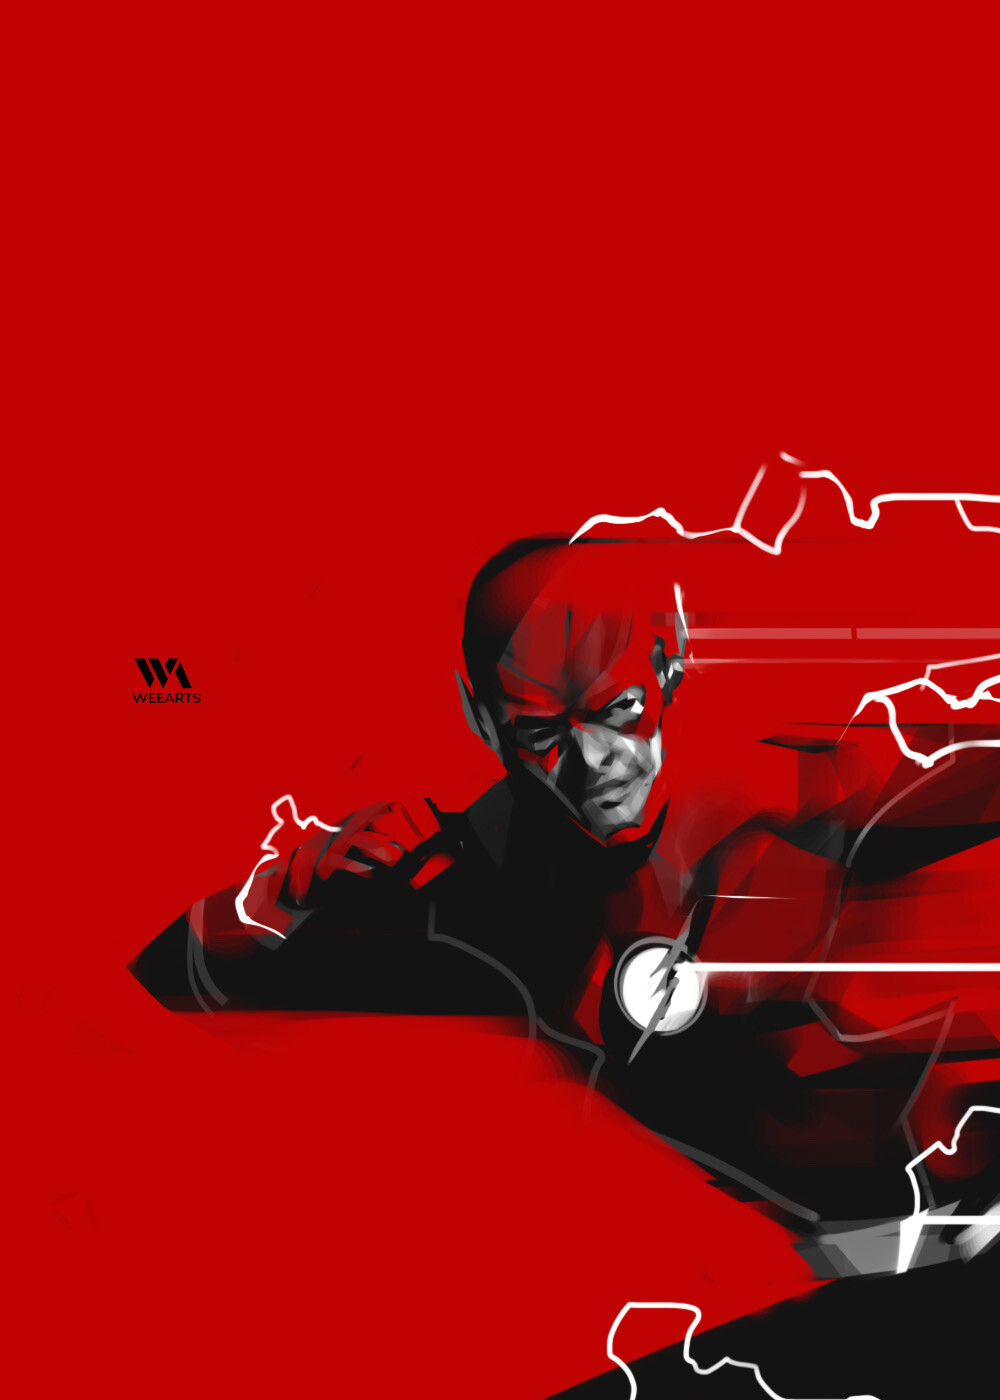 ArtStation - The Flash - Red background series